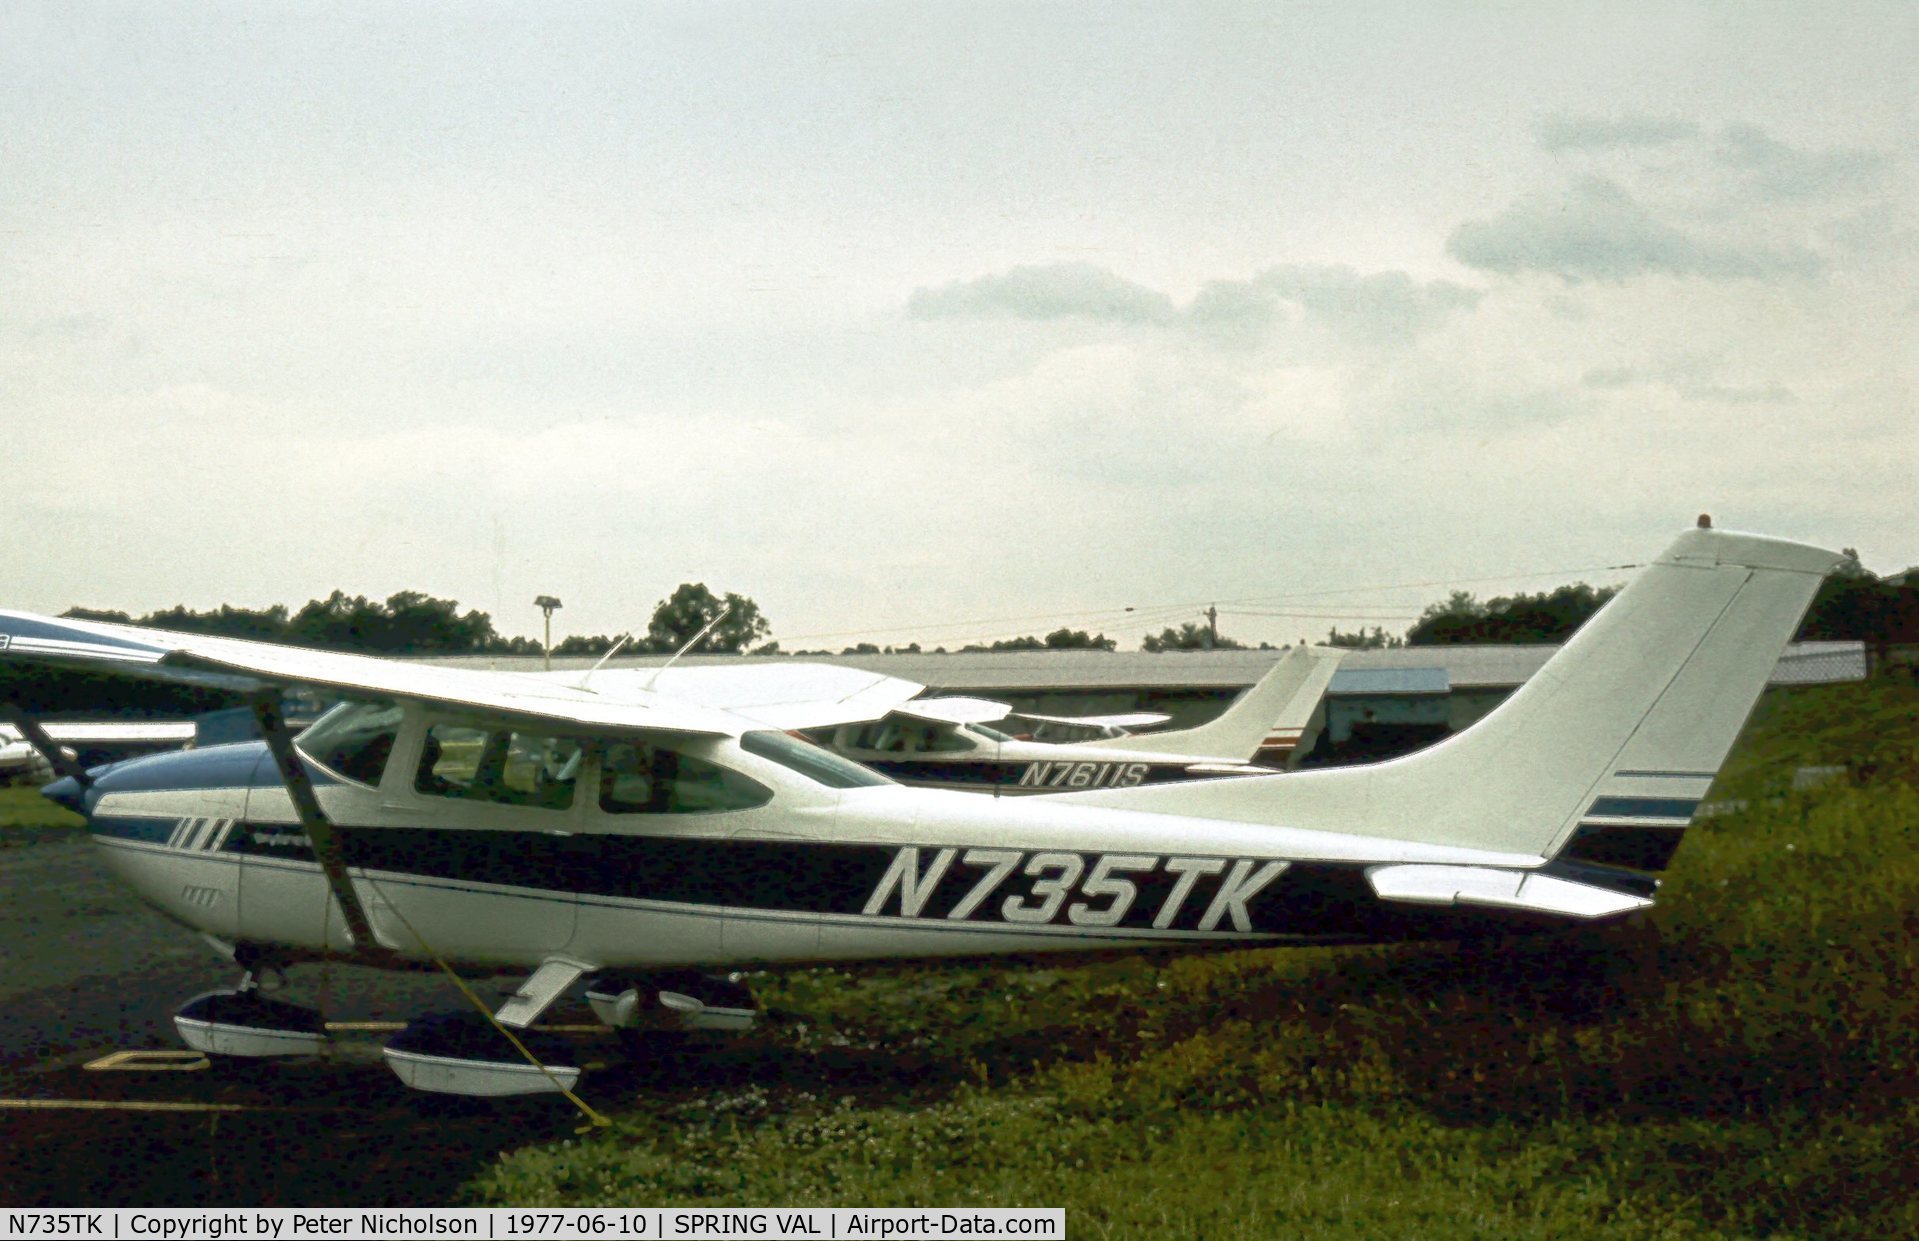 N735TK, 1977 Cessna 182Q Skylane C/N 18265669, Cessna 182Q Skylane parked at Spring Valley Airport, New York State in the Summer of 1977 - the airport closed in 1985.